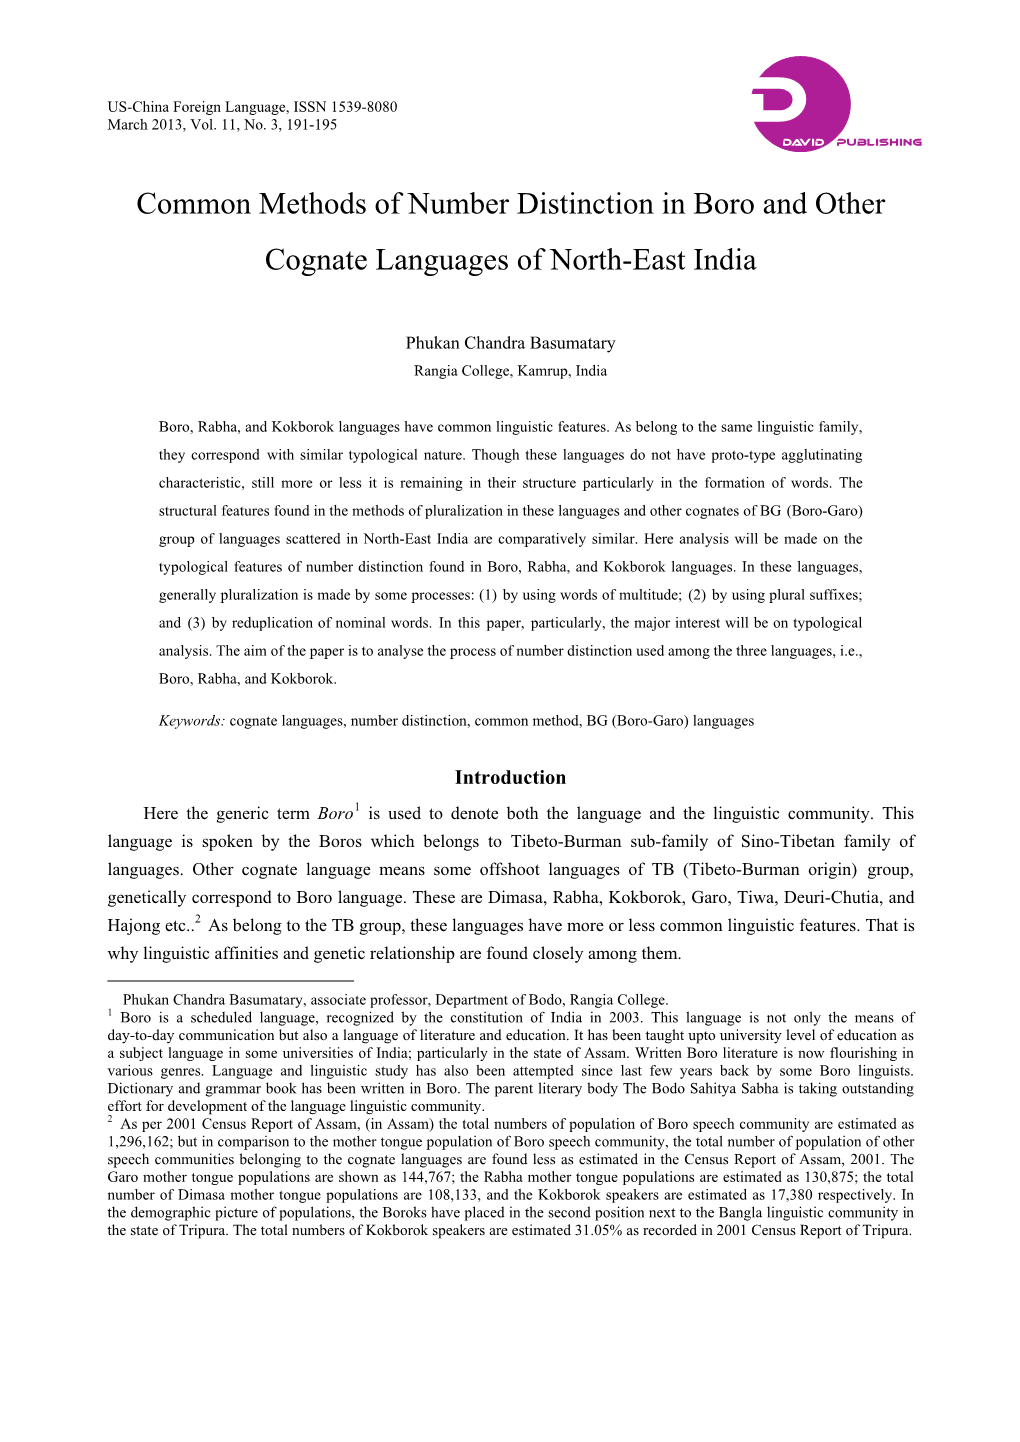 Common Methods of Number Distinction in Boro and Other Cognate Languages of North-East India